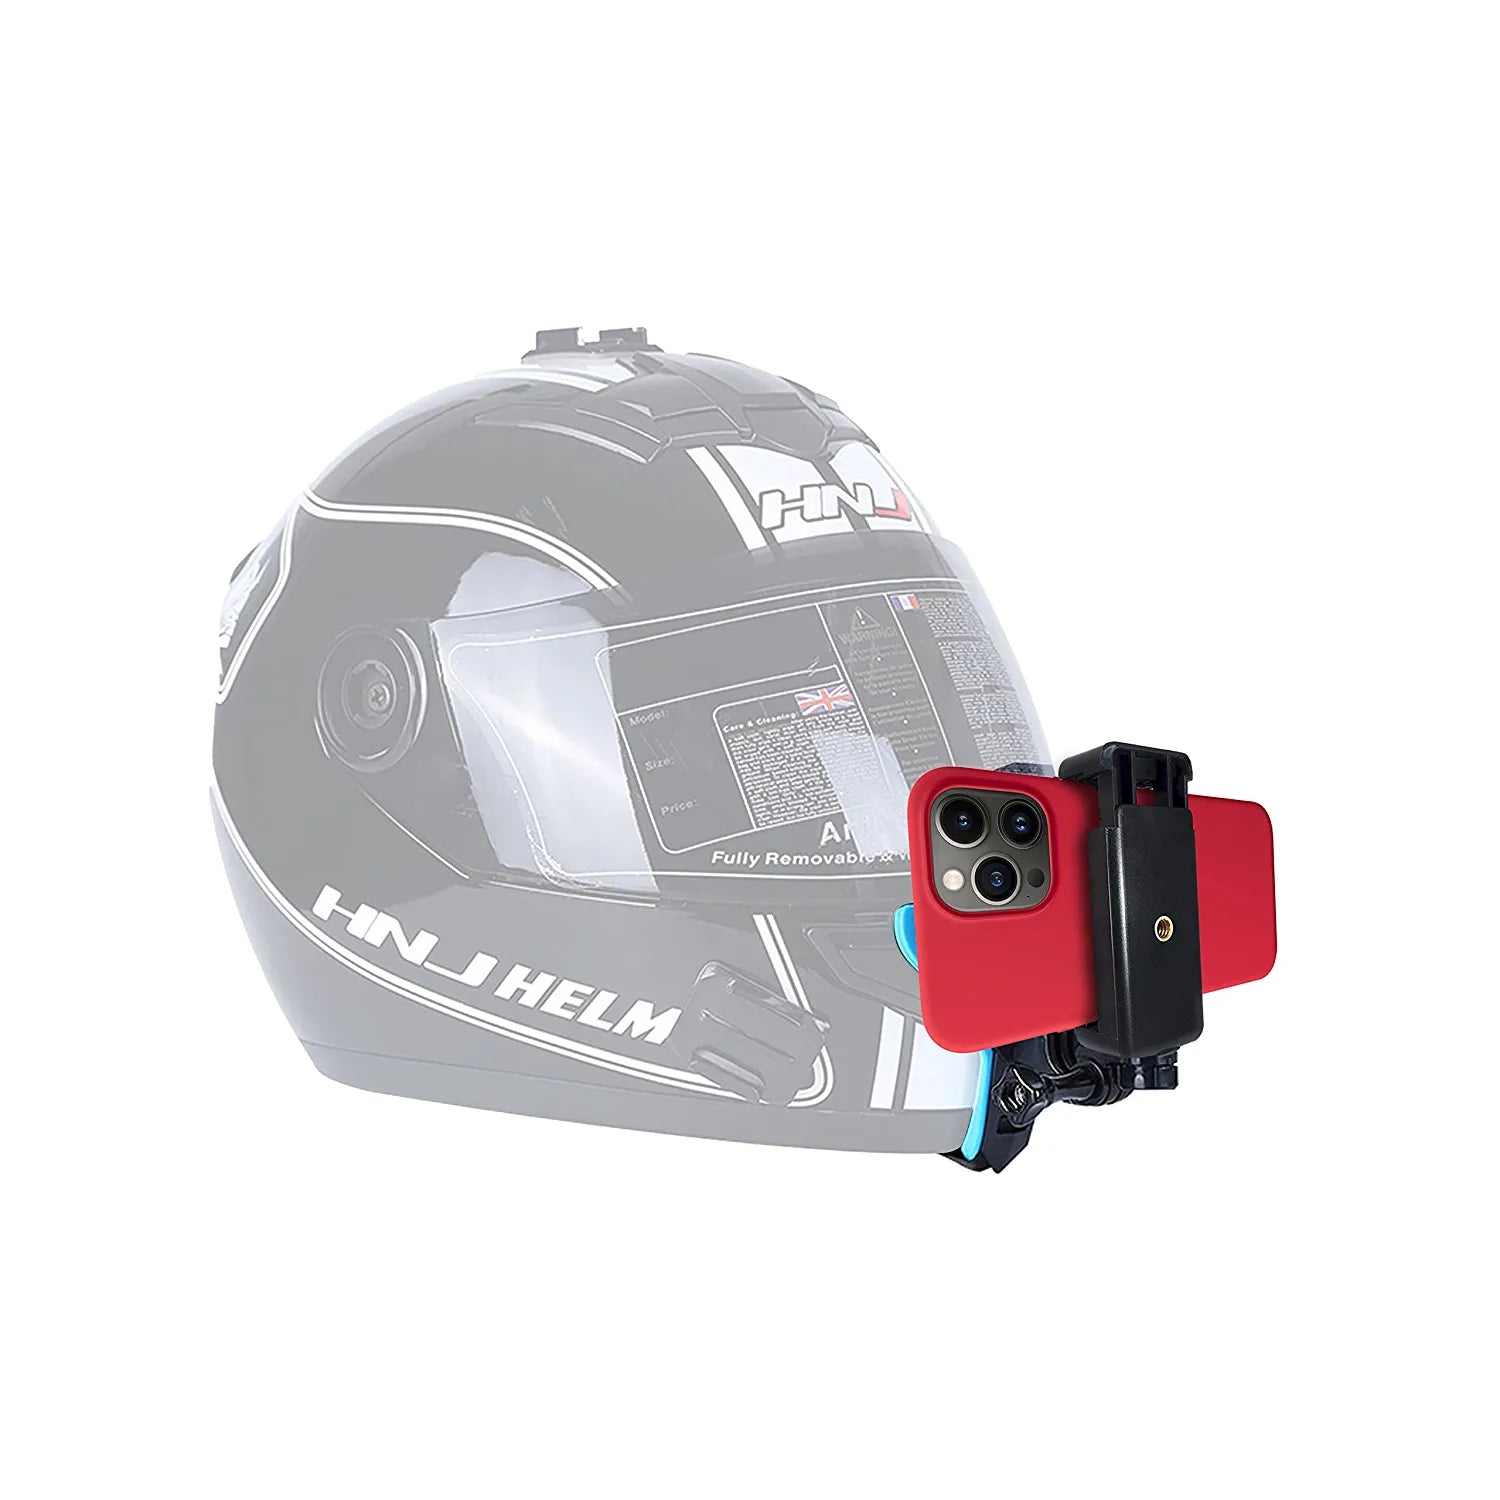 Helmet Chin Strap Mount with Mobile Clip & Screw Compatible with All Smart Phones Go pro Hero